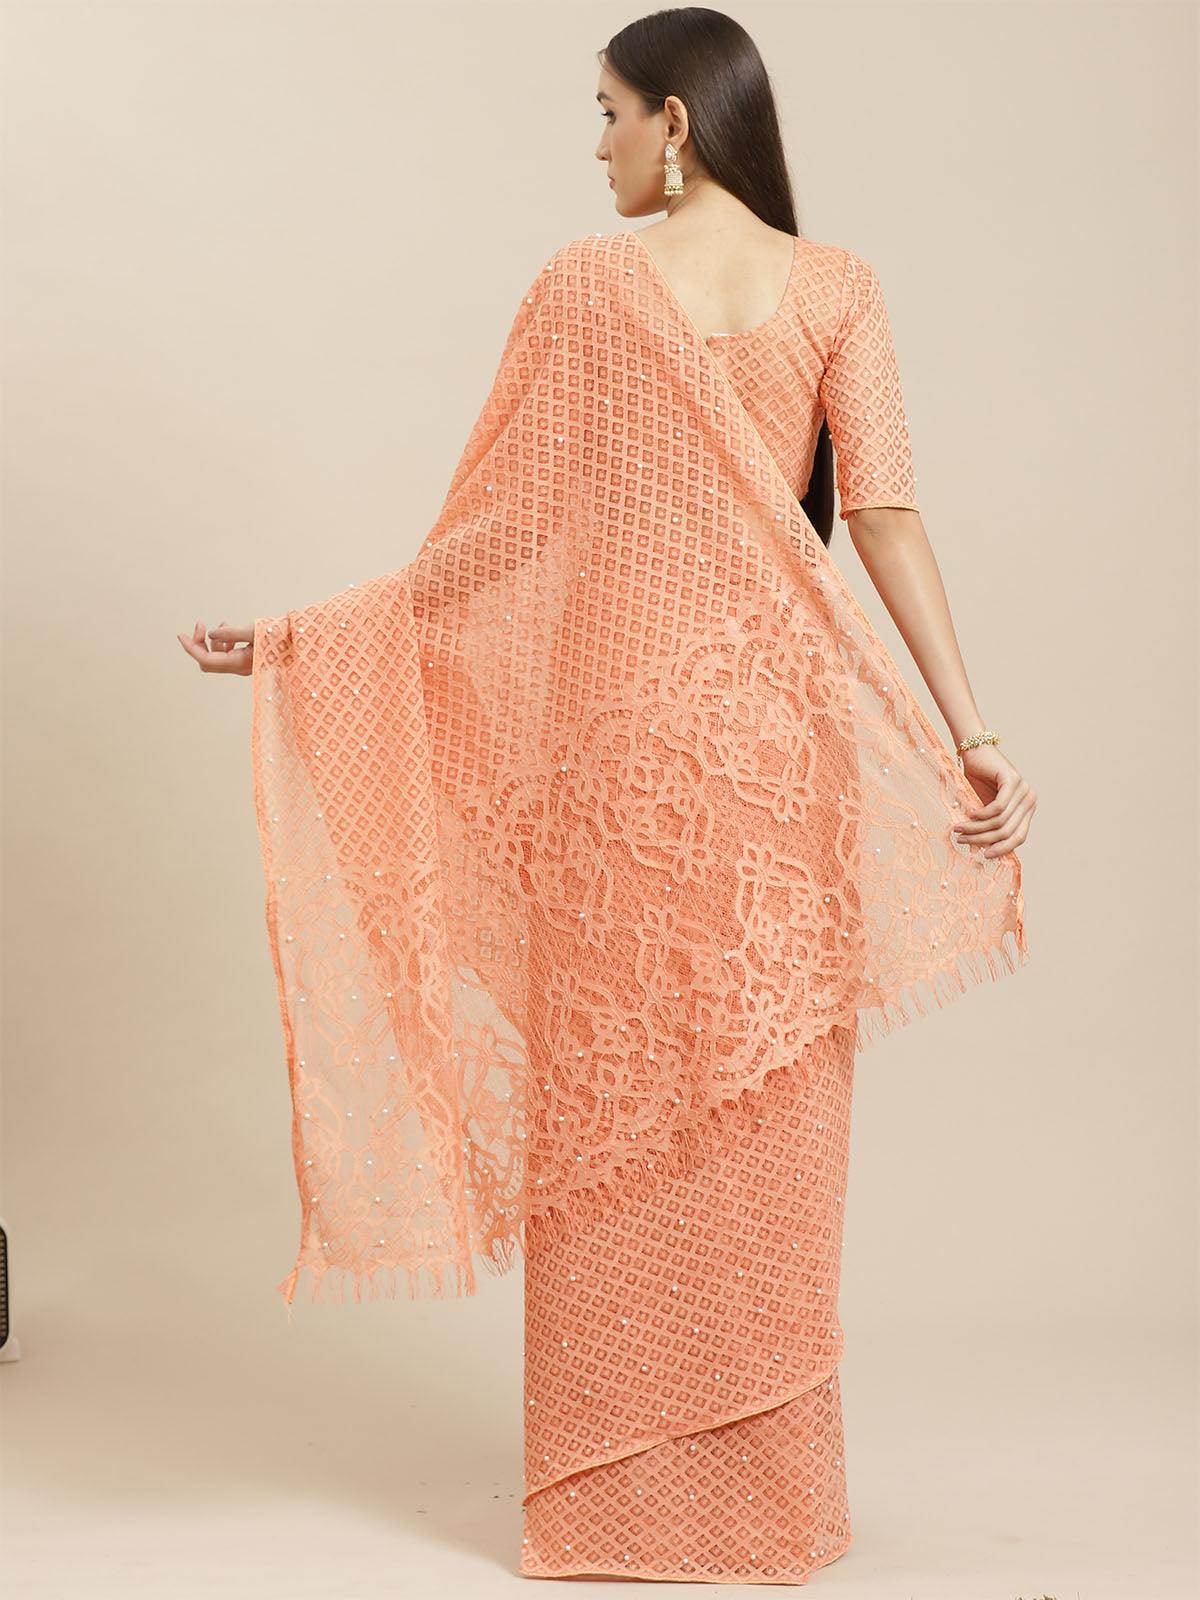 Peach Party Wear Net(Super Net) Solid Saree With Unstitched Blouse - Odette